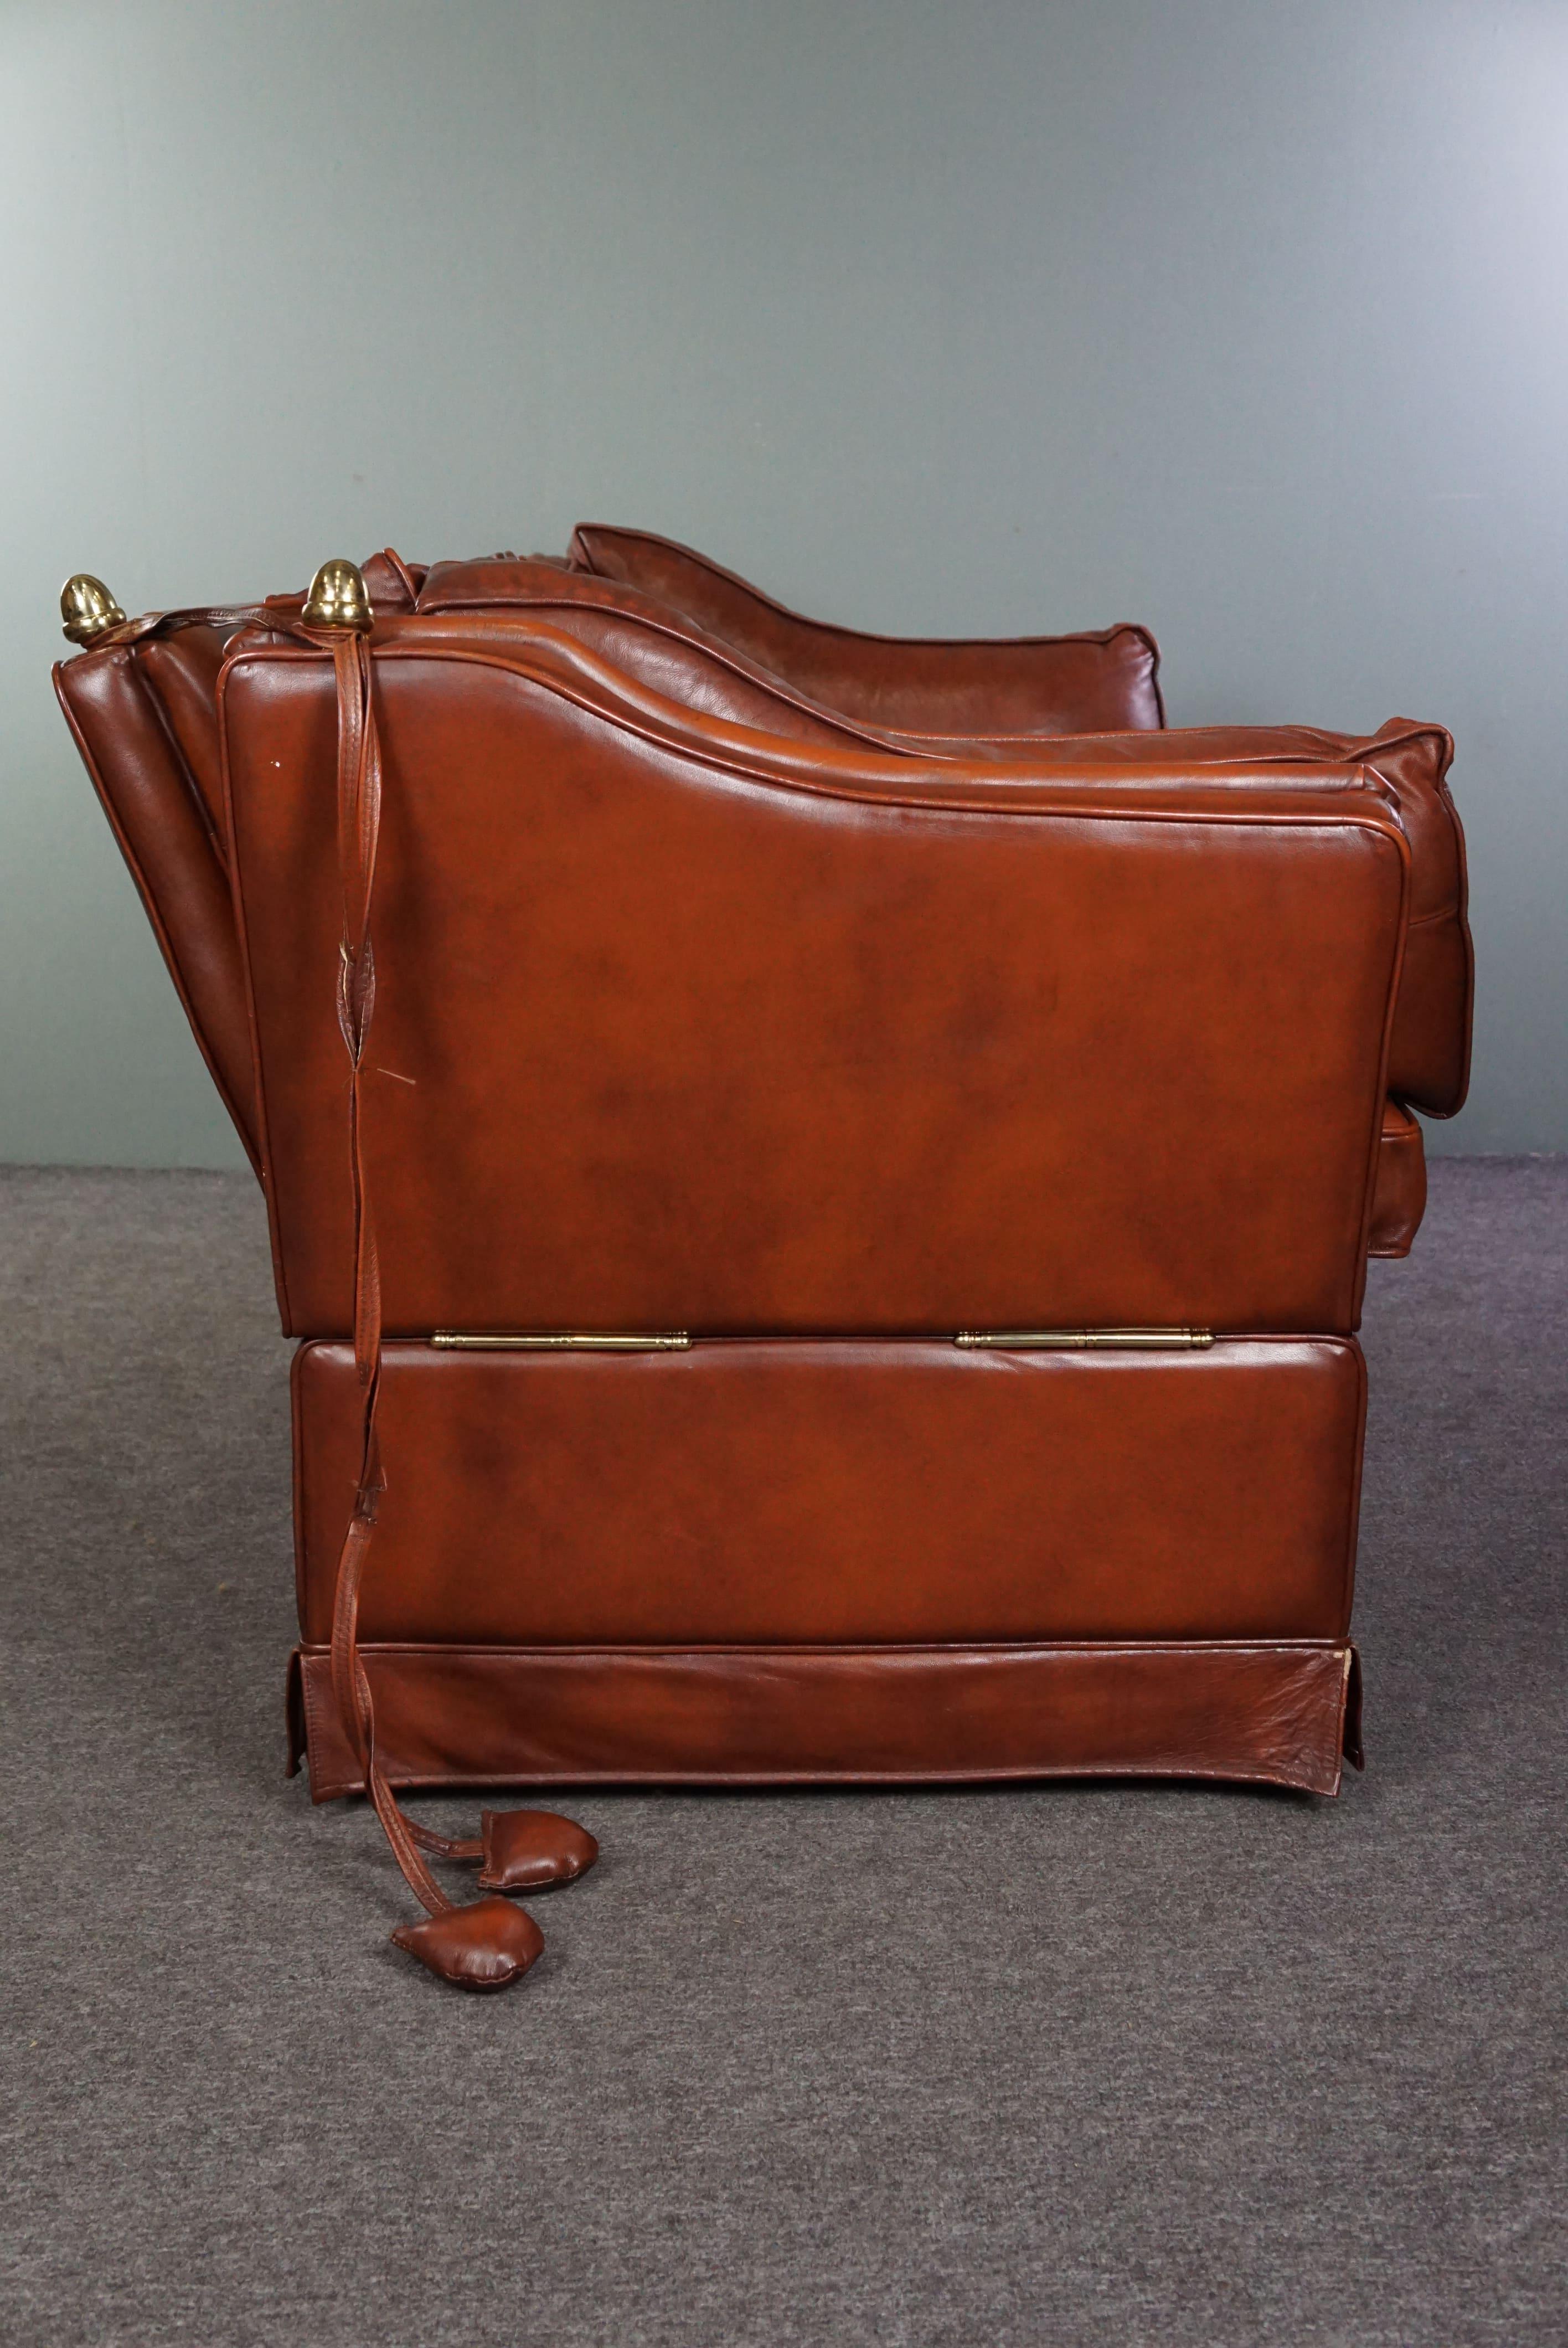 Offered is this beautiful cognac-colored cowhide leather 2-seater castle bench with gold-colored details. Castle benches not only boast their name for grandeur but also for their appearance. With their foldable armrests and stately presence, they